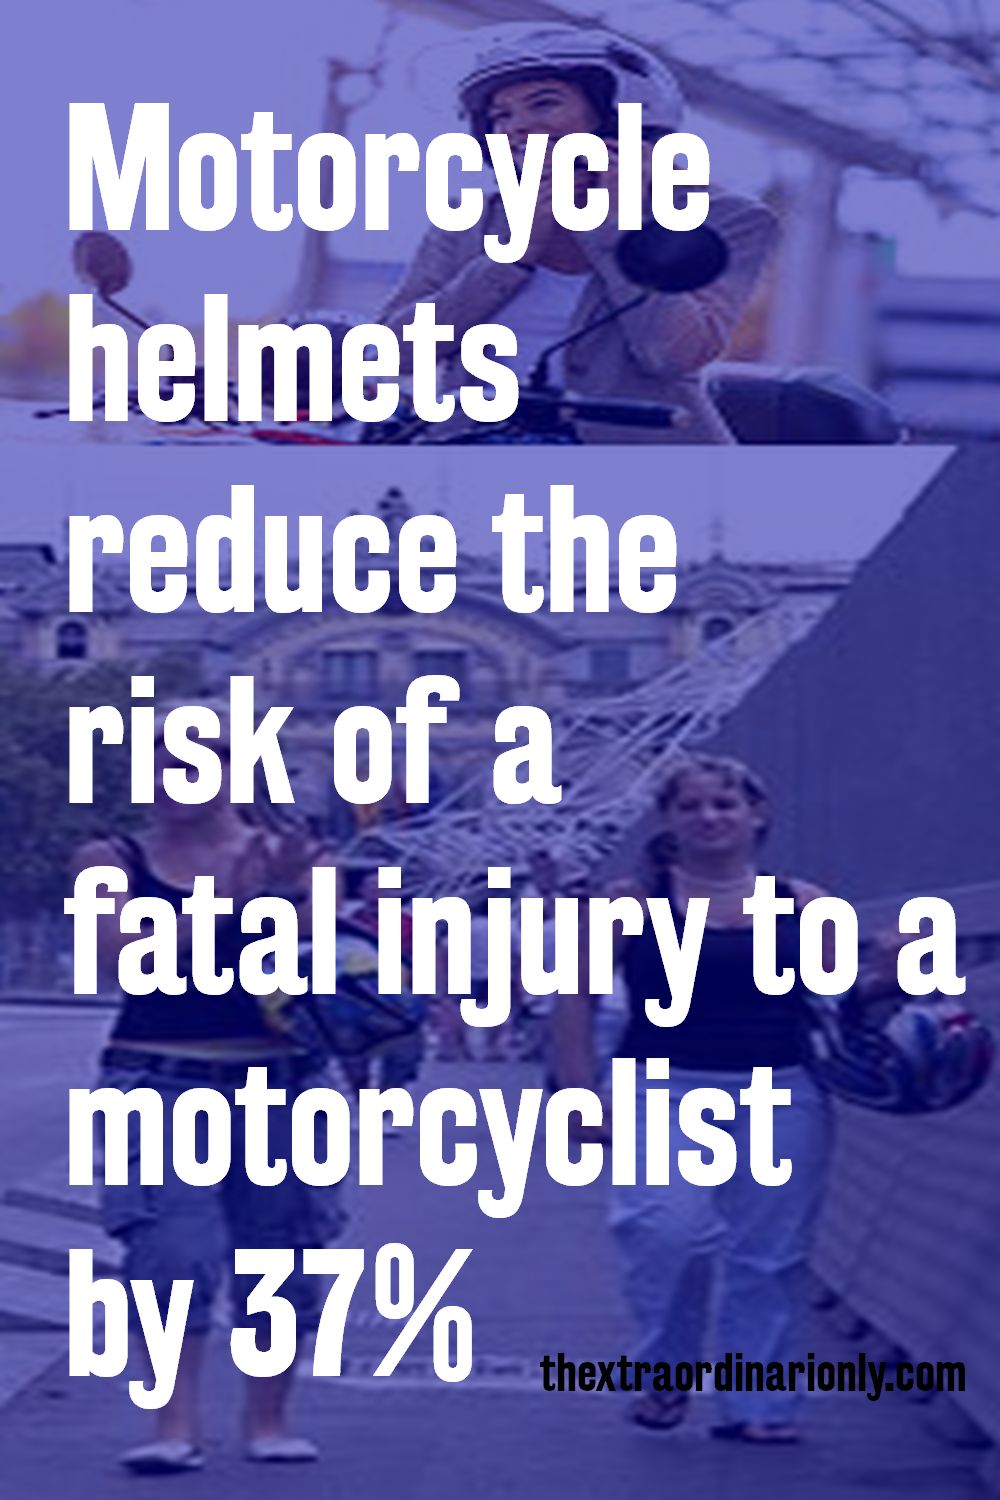 Motorcycle helmets reduce the risk fatal injury by 37%